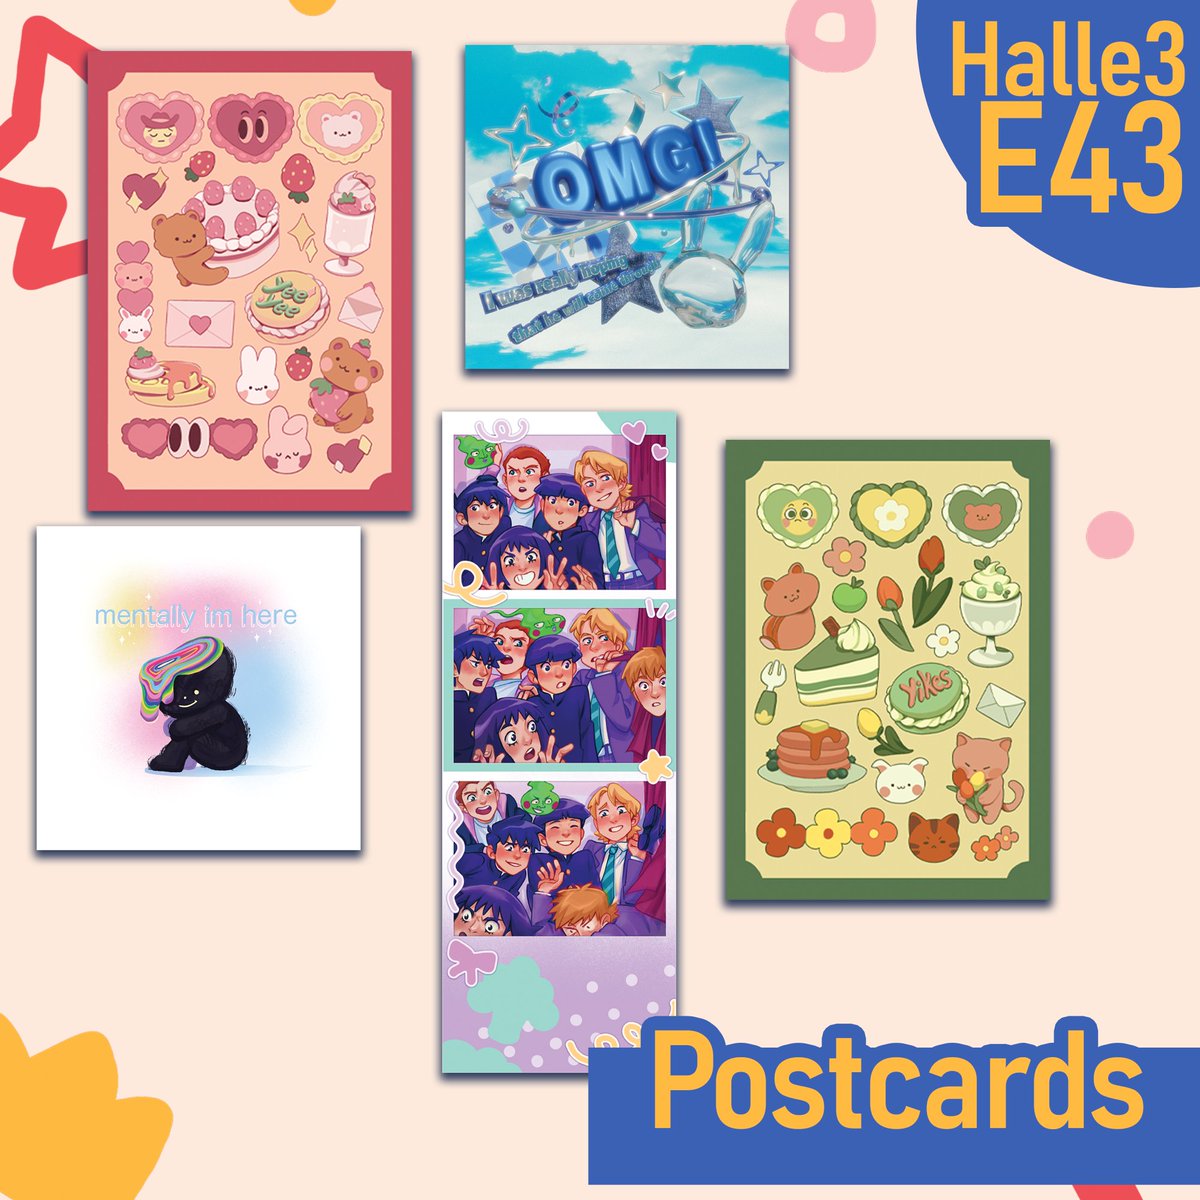 CON CATALOGE TIME!!!! gonna be at Dokomi this weekend at H16 in Hall 3 in the artist alley with my partner in crime @Baochi_art !!! COME VISIT US , we have lots of goodies and we love chatting!